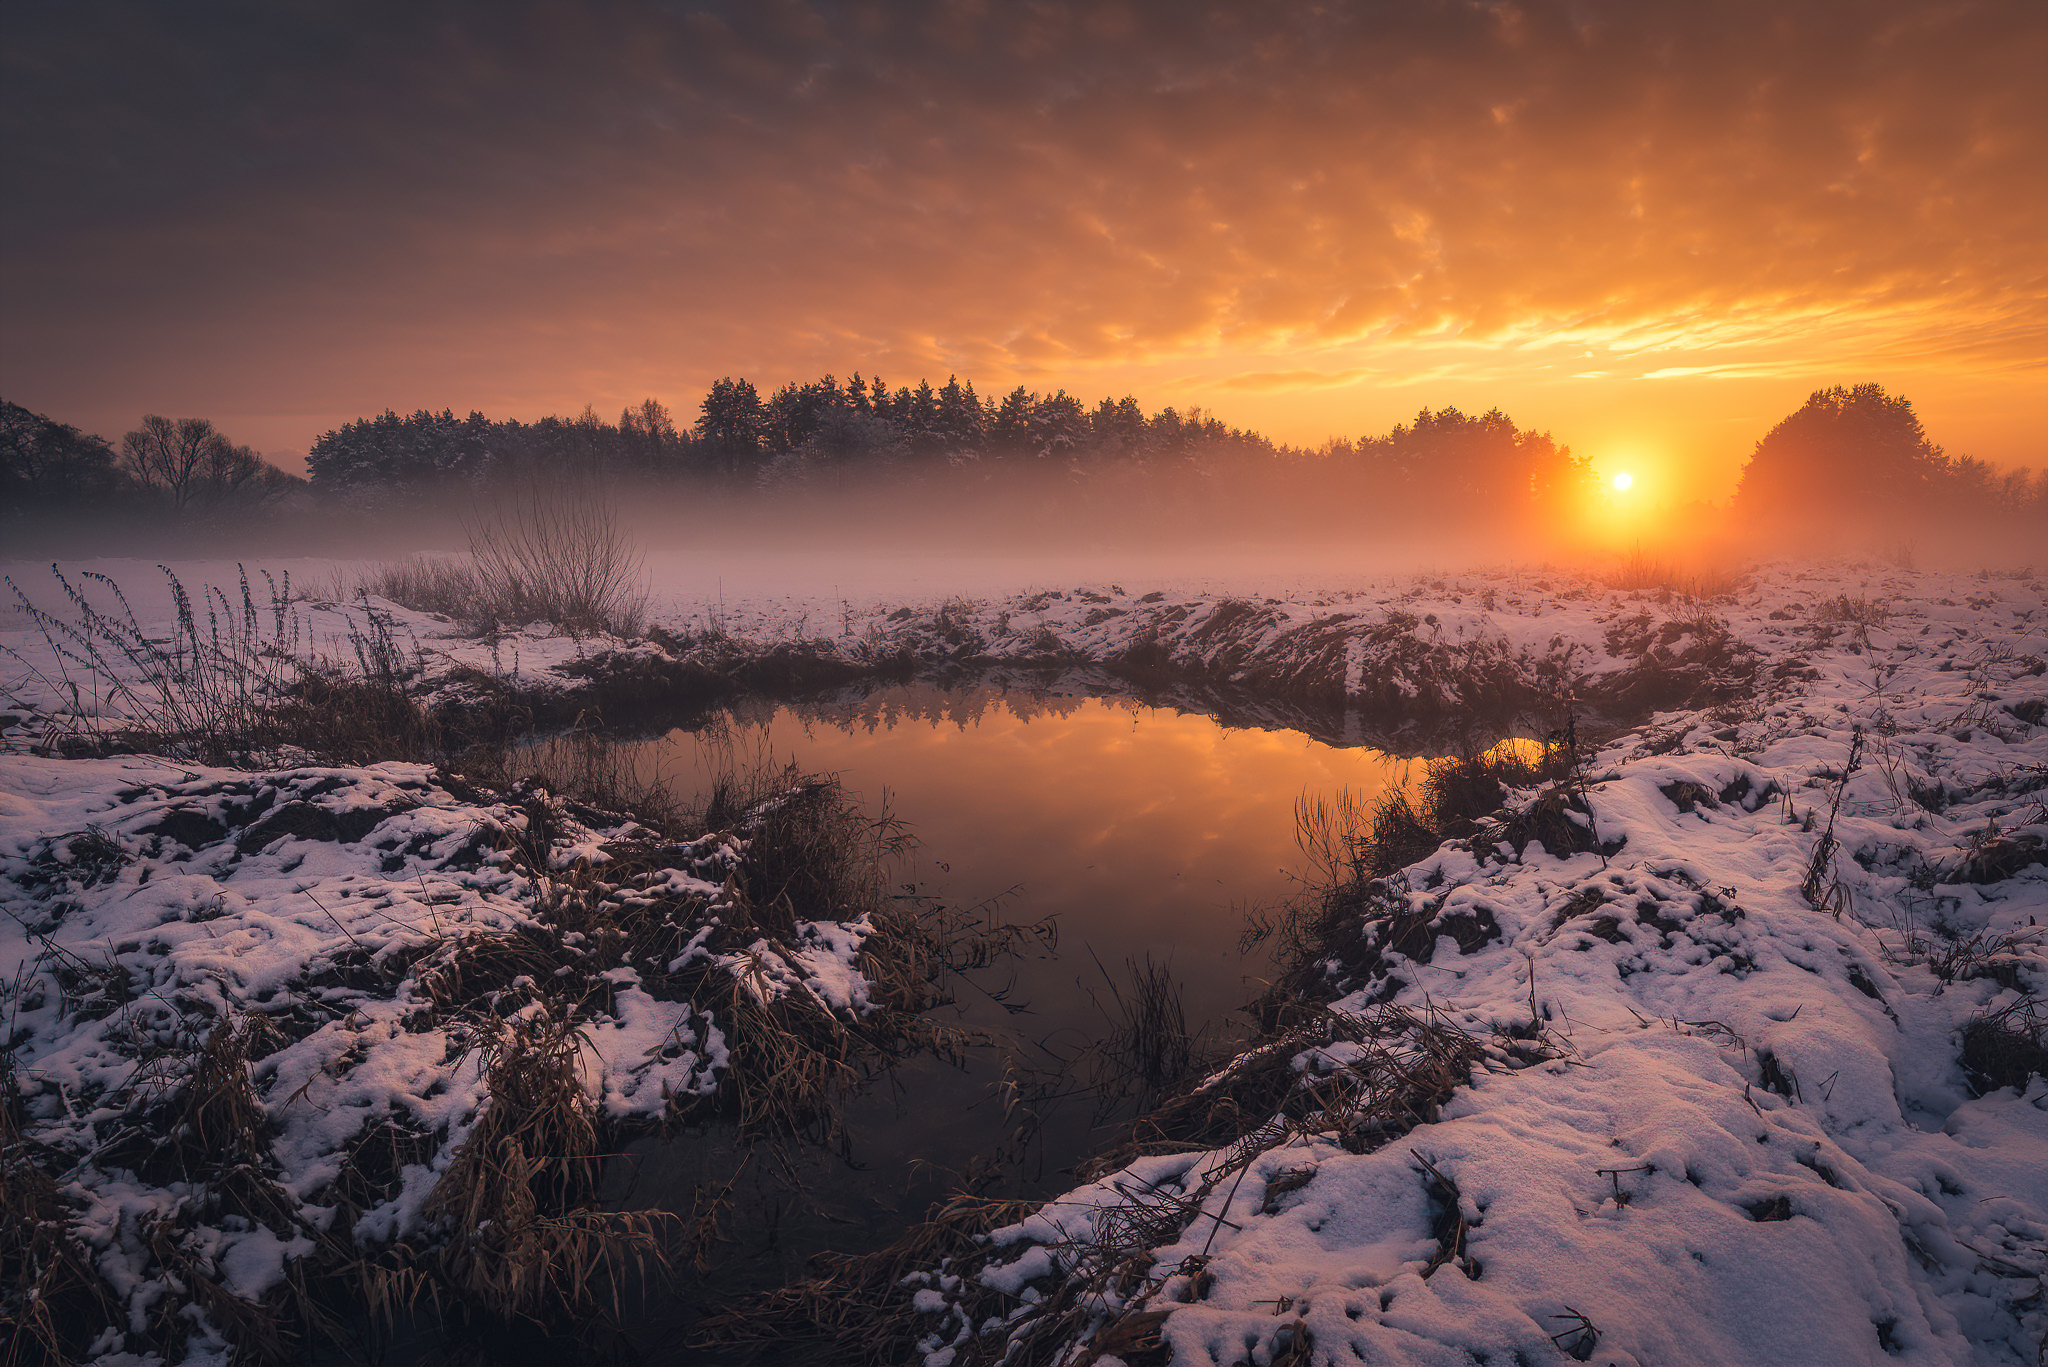 General 2048x1367 mist landscape sunset trees nature outdoors photography snow snow covered water clouds sky Poland Michał Tomczak